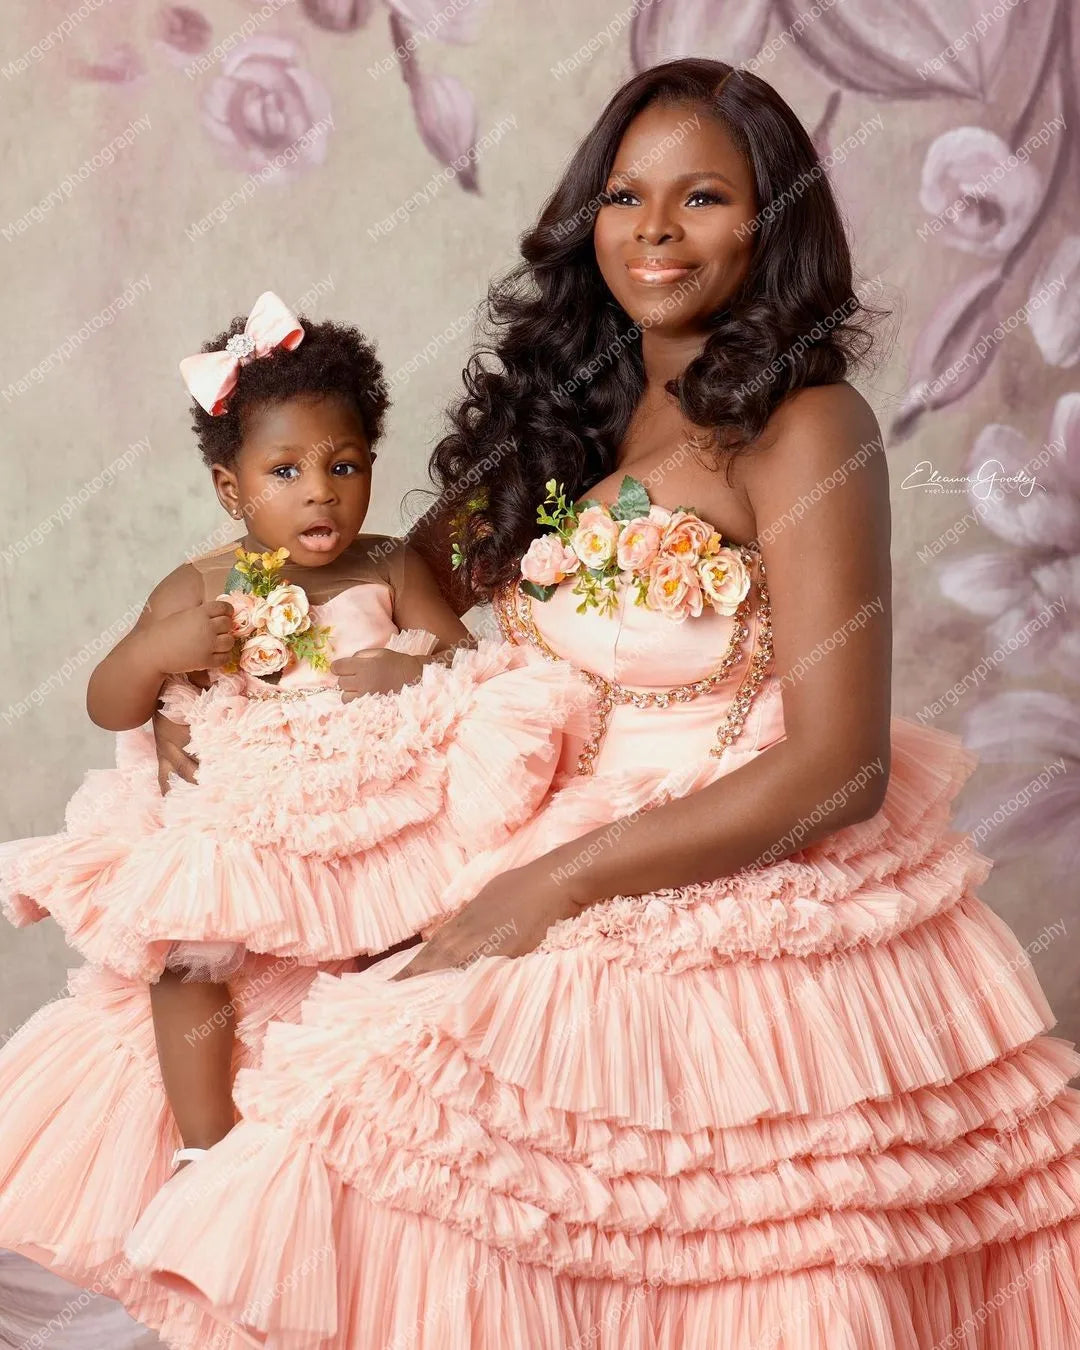 Mother And Daughter Photo Shoot Ball Gown S